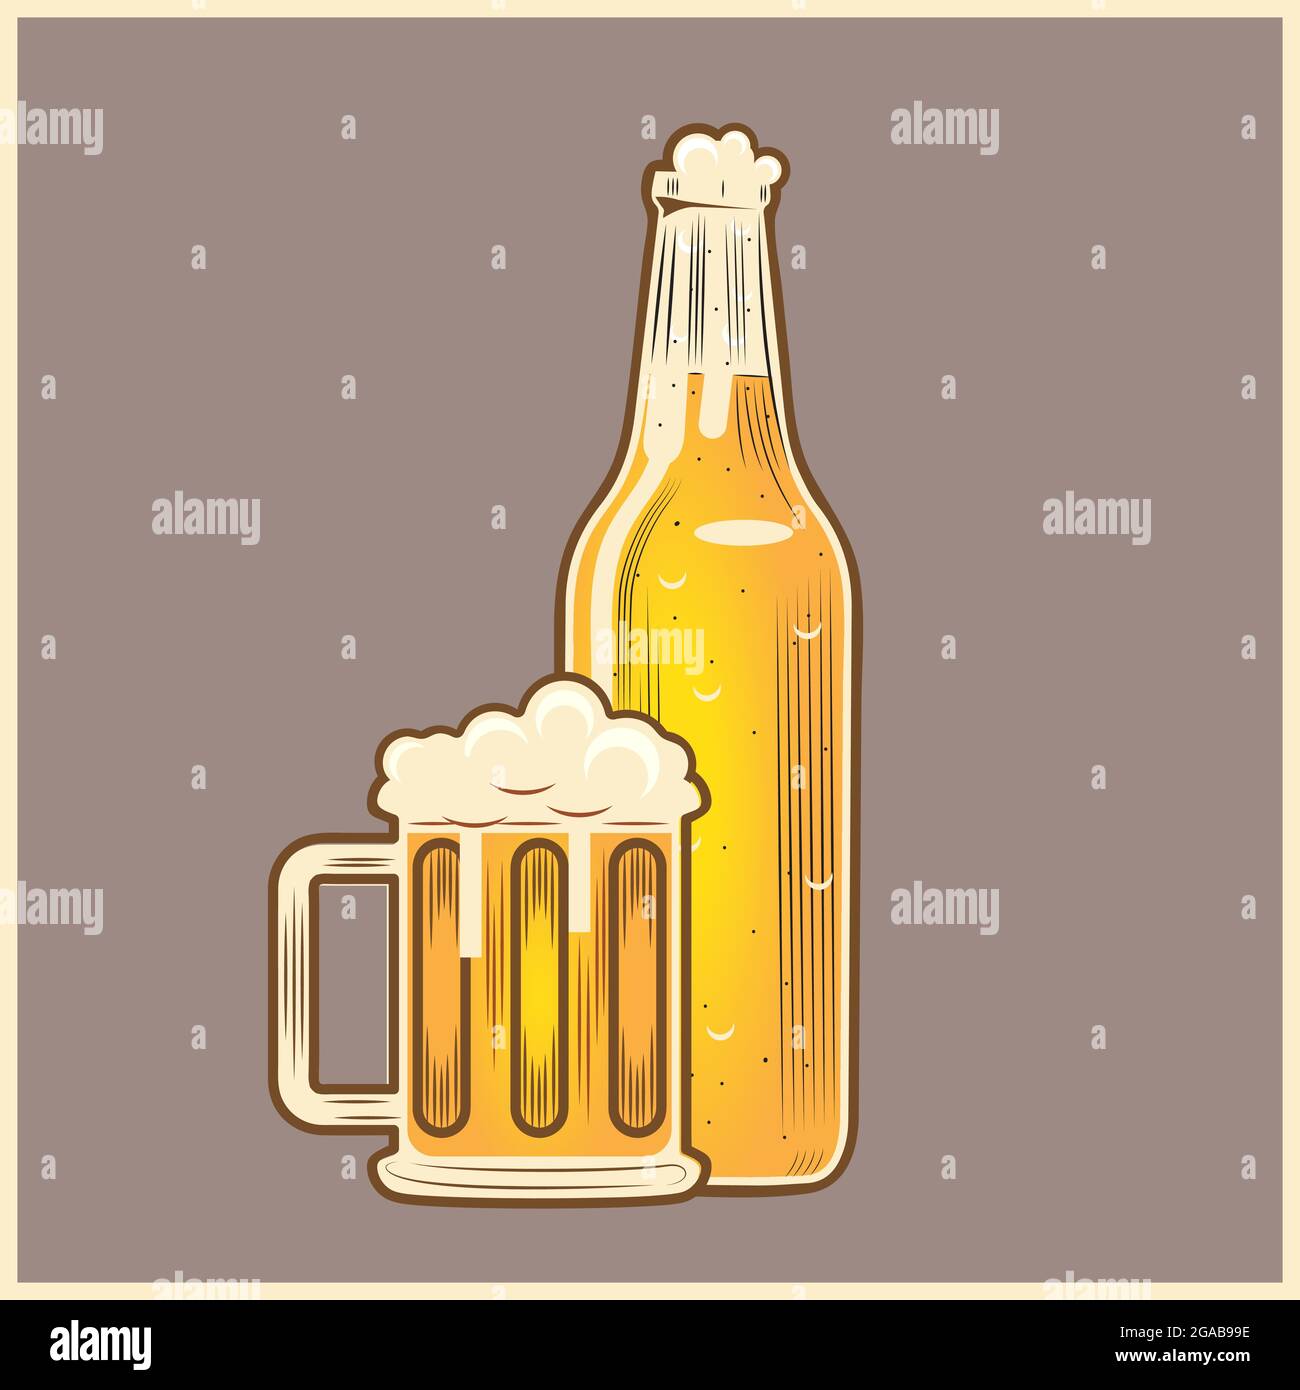 Beer glass and Bottle Vintage style vector illustration for design element, such as logo poster or any other purpose Stock Vector